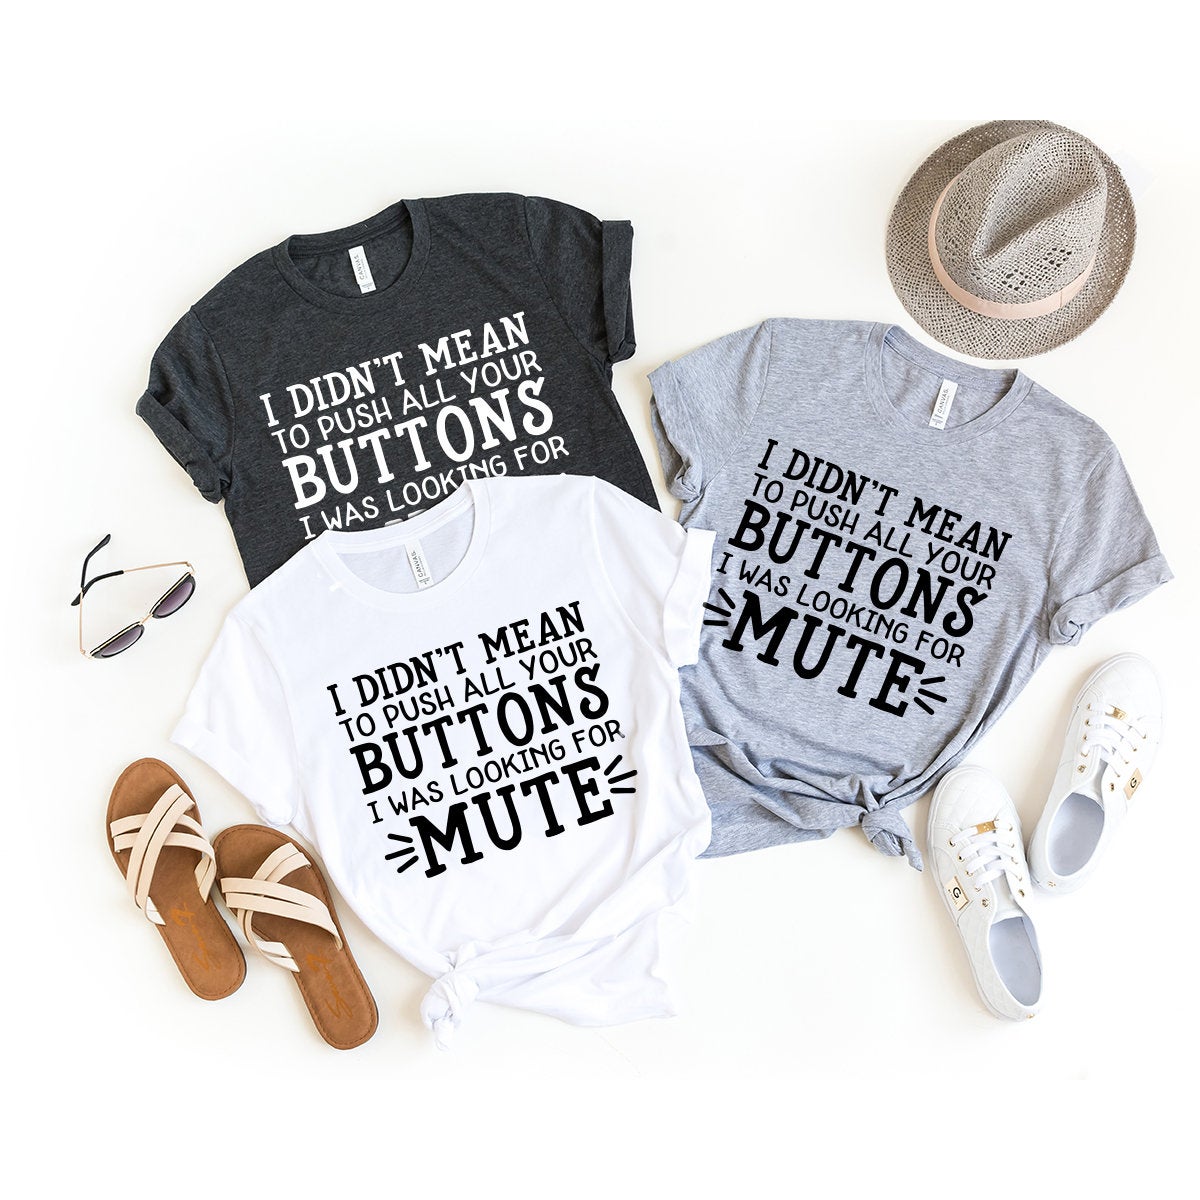 Sassy Quotes Shirt, Funny Adult Shirt, Humor T-Shirt, Funny Sarcastic Shirt, I Didn't Mean To Push All Buttons I Was Looking For Mute Shirt - Fastdeliverytees.com